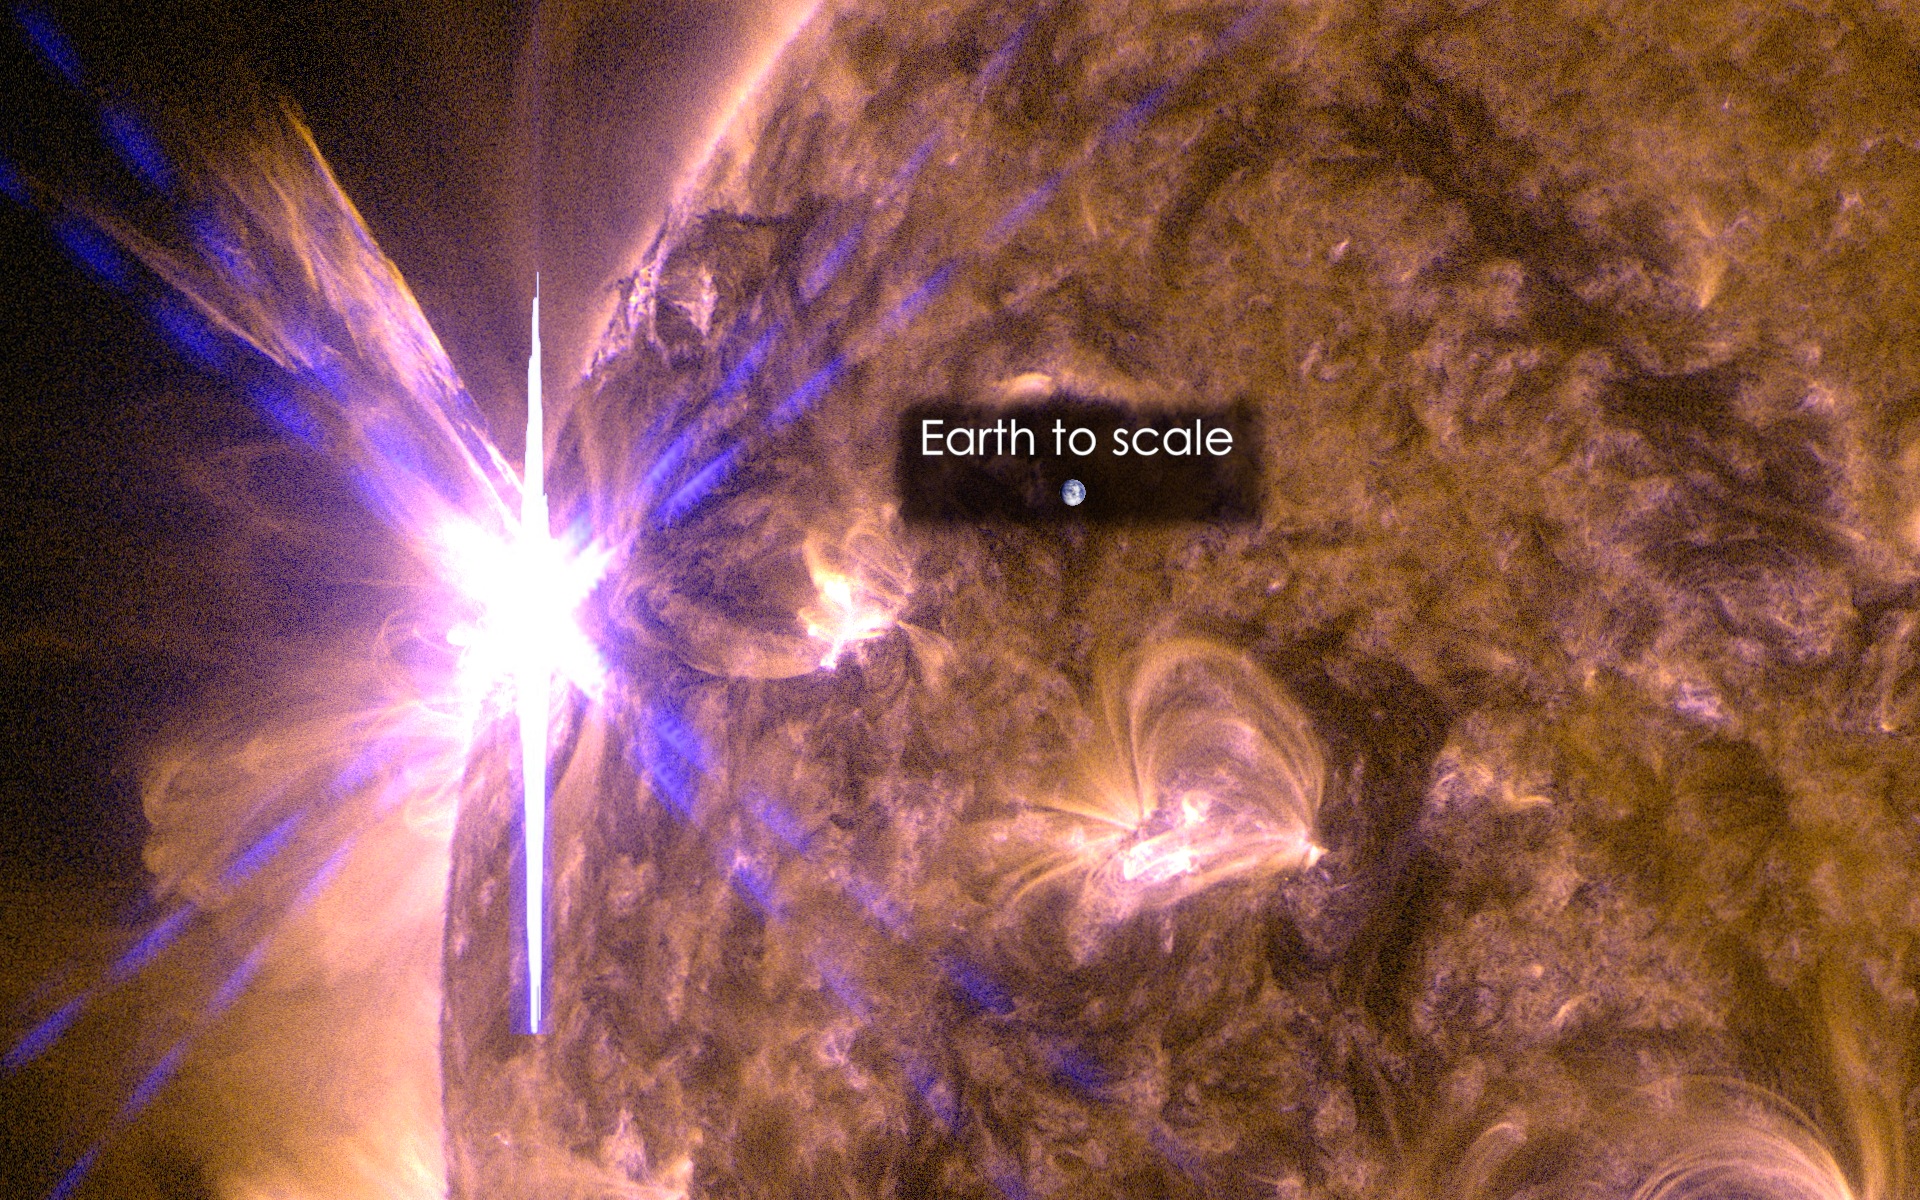 PHOTO: A composite image captured by NASA's Solar Dynamics Observatory shows a solar flare on the edge of the sun on May 5, 2015 with a graphic representing the Earth shown to scale.